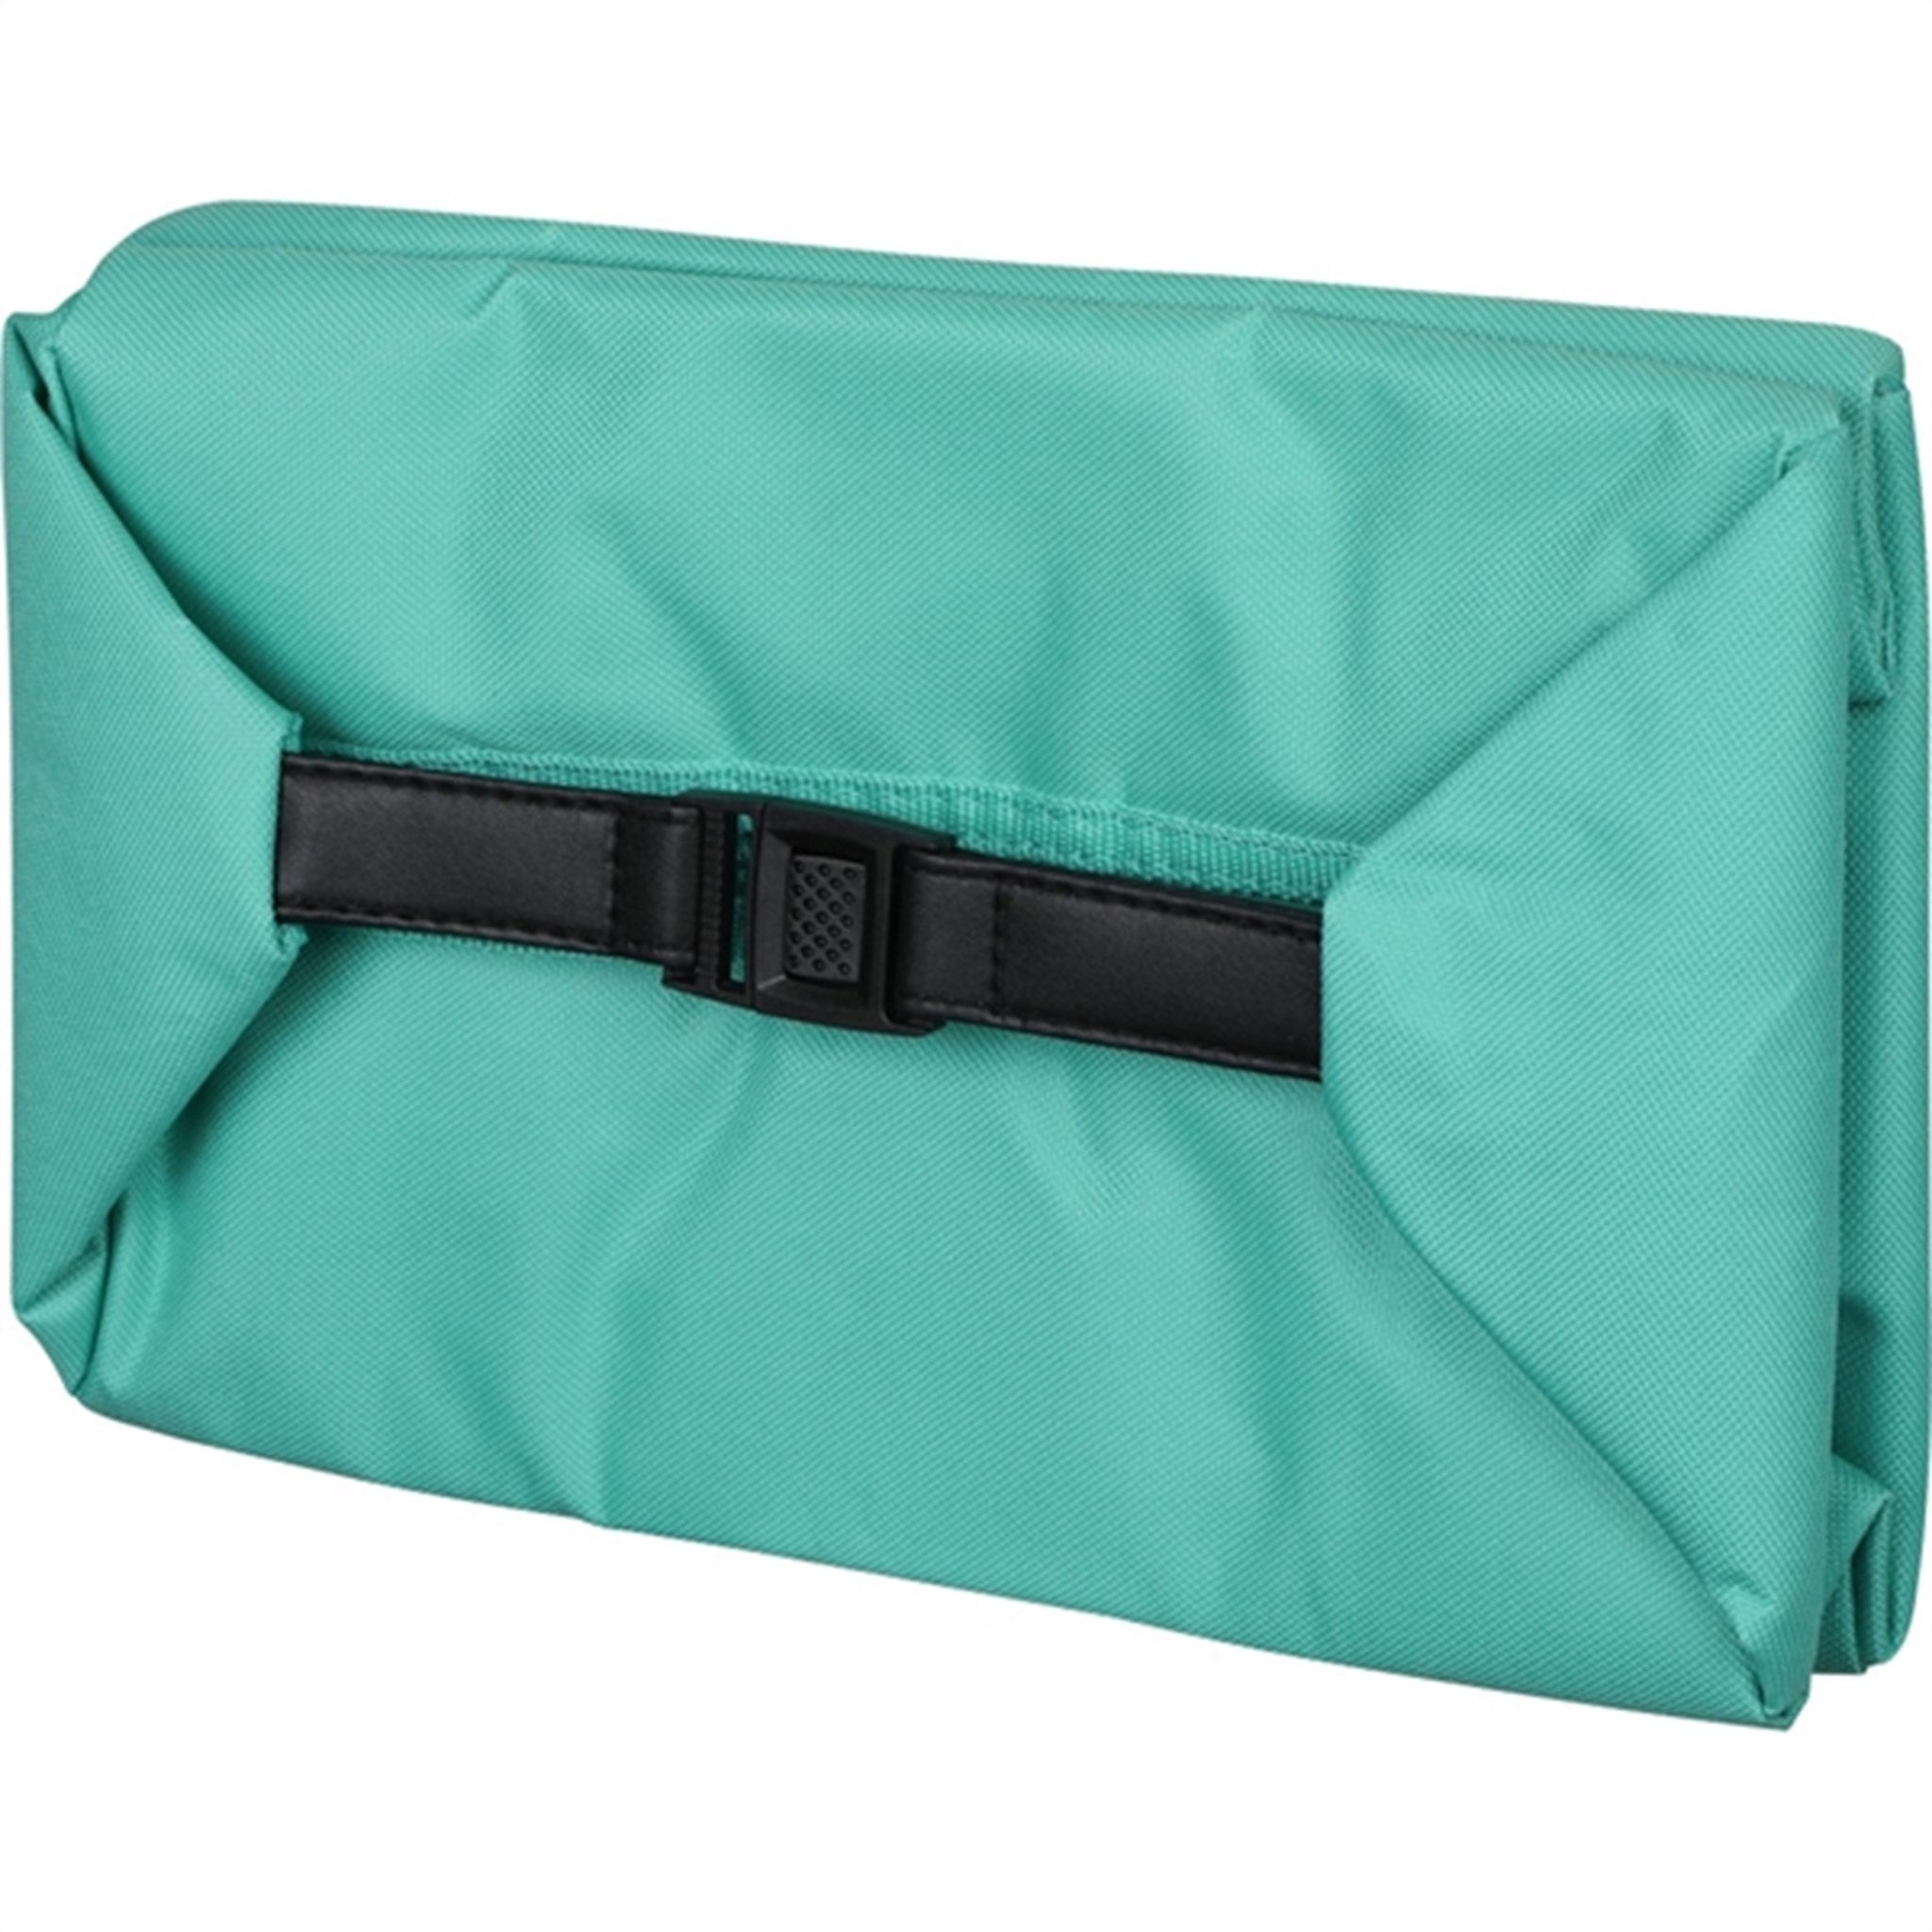 Sistema To Go Bento Coolers 4 L Minty Teal 4